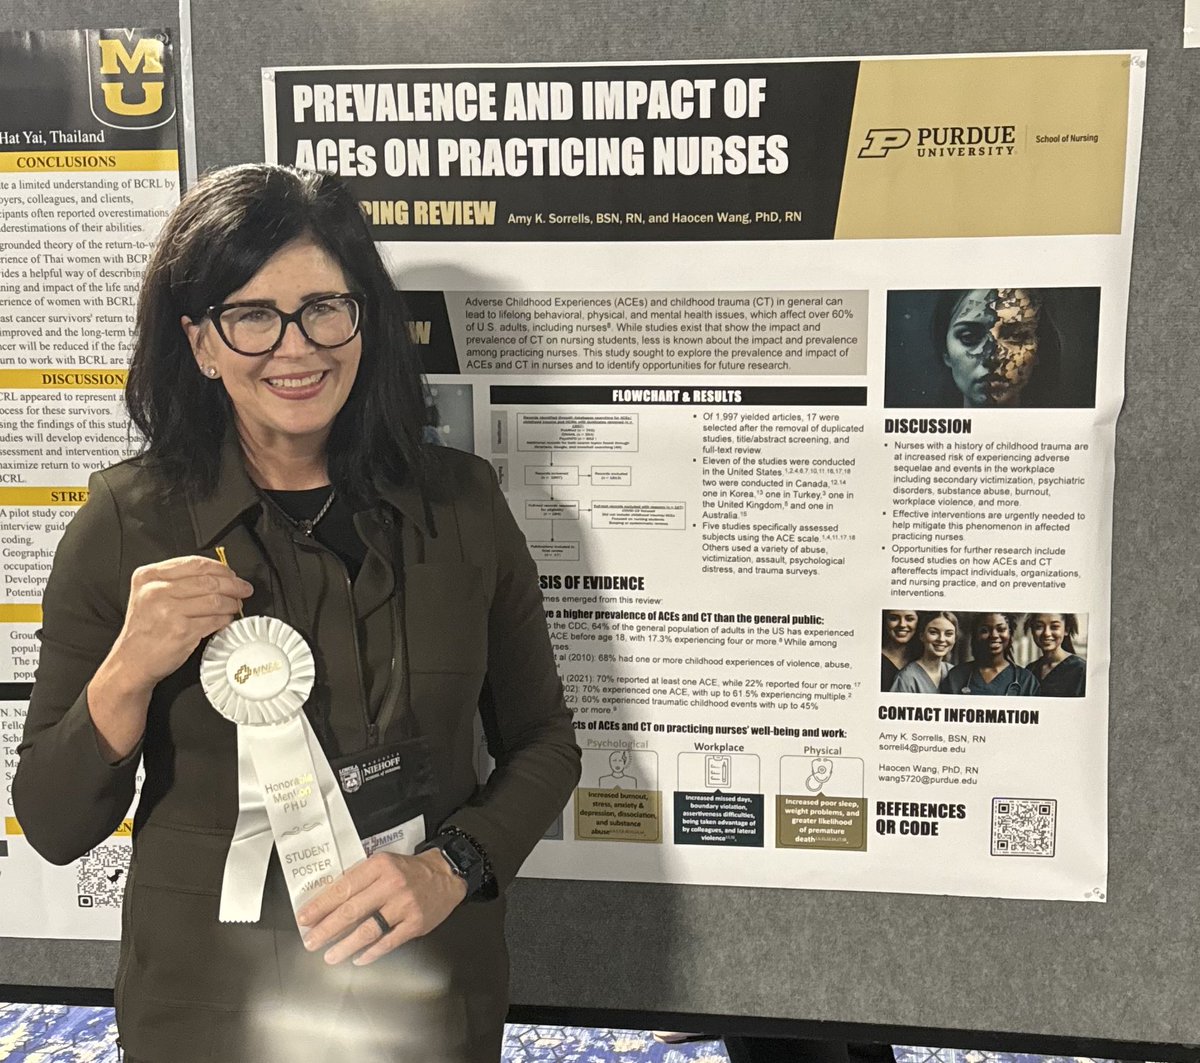 My first @MidwestNursing conference was a delight! Representing @PurdueHHS as a Ph.D. Student and receiving this poster award was a true honor. Hope to see you in Indianapolis next year! 

#ACEs #adversechildhoodexperiences #traumaresearch